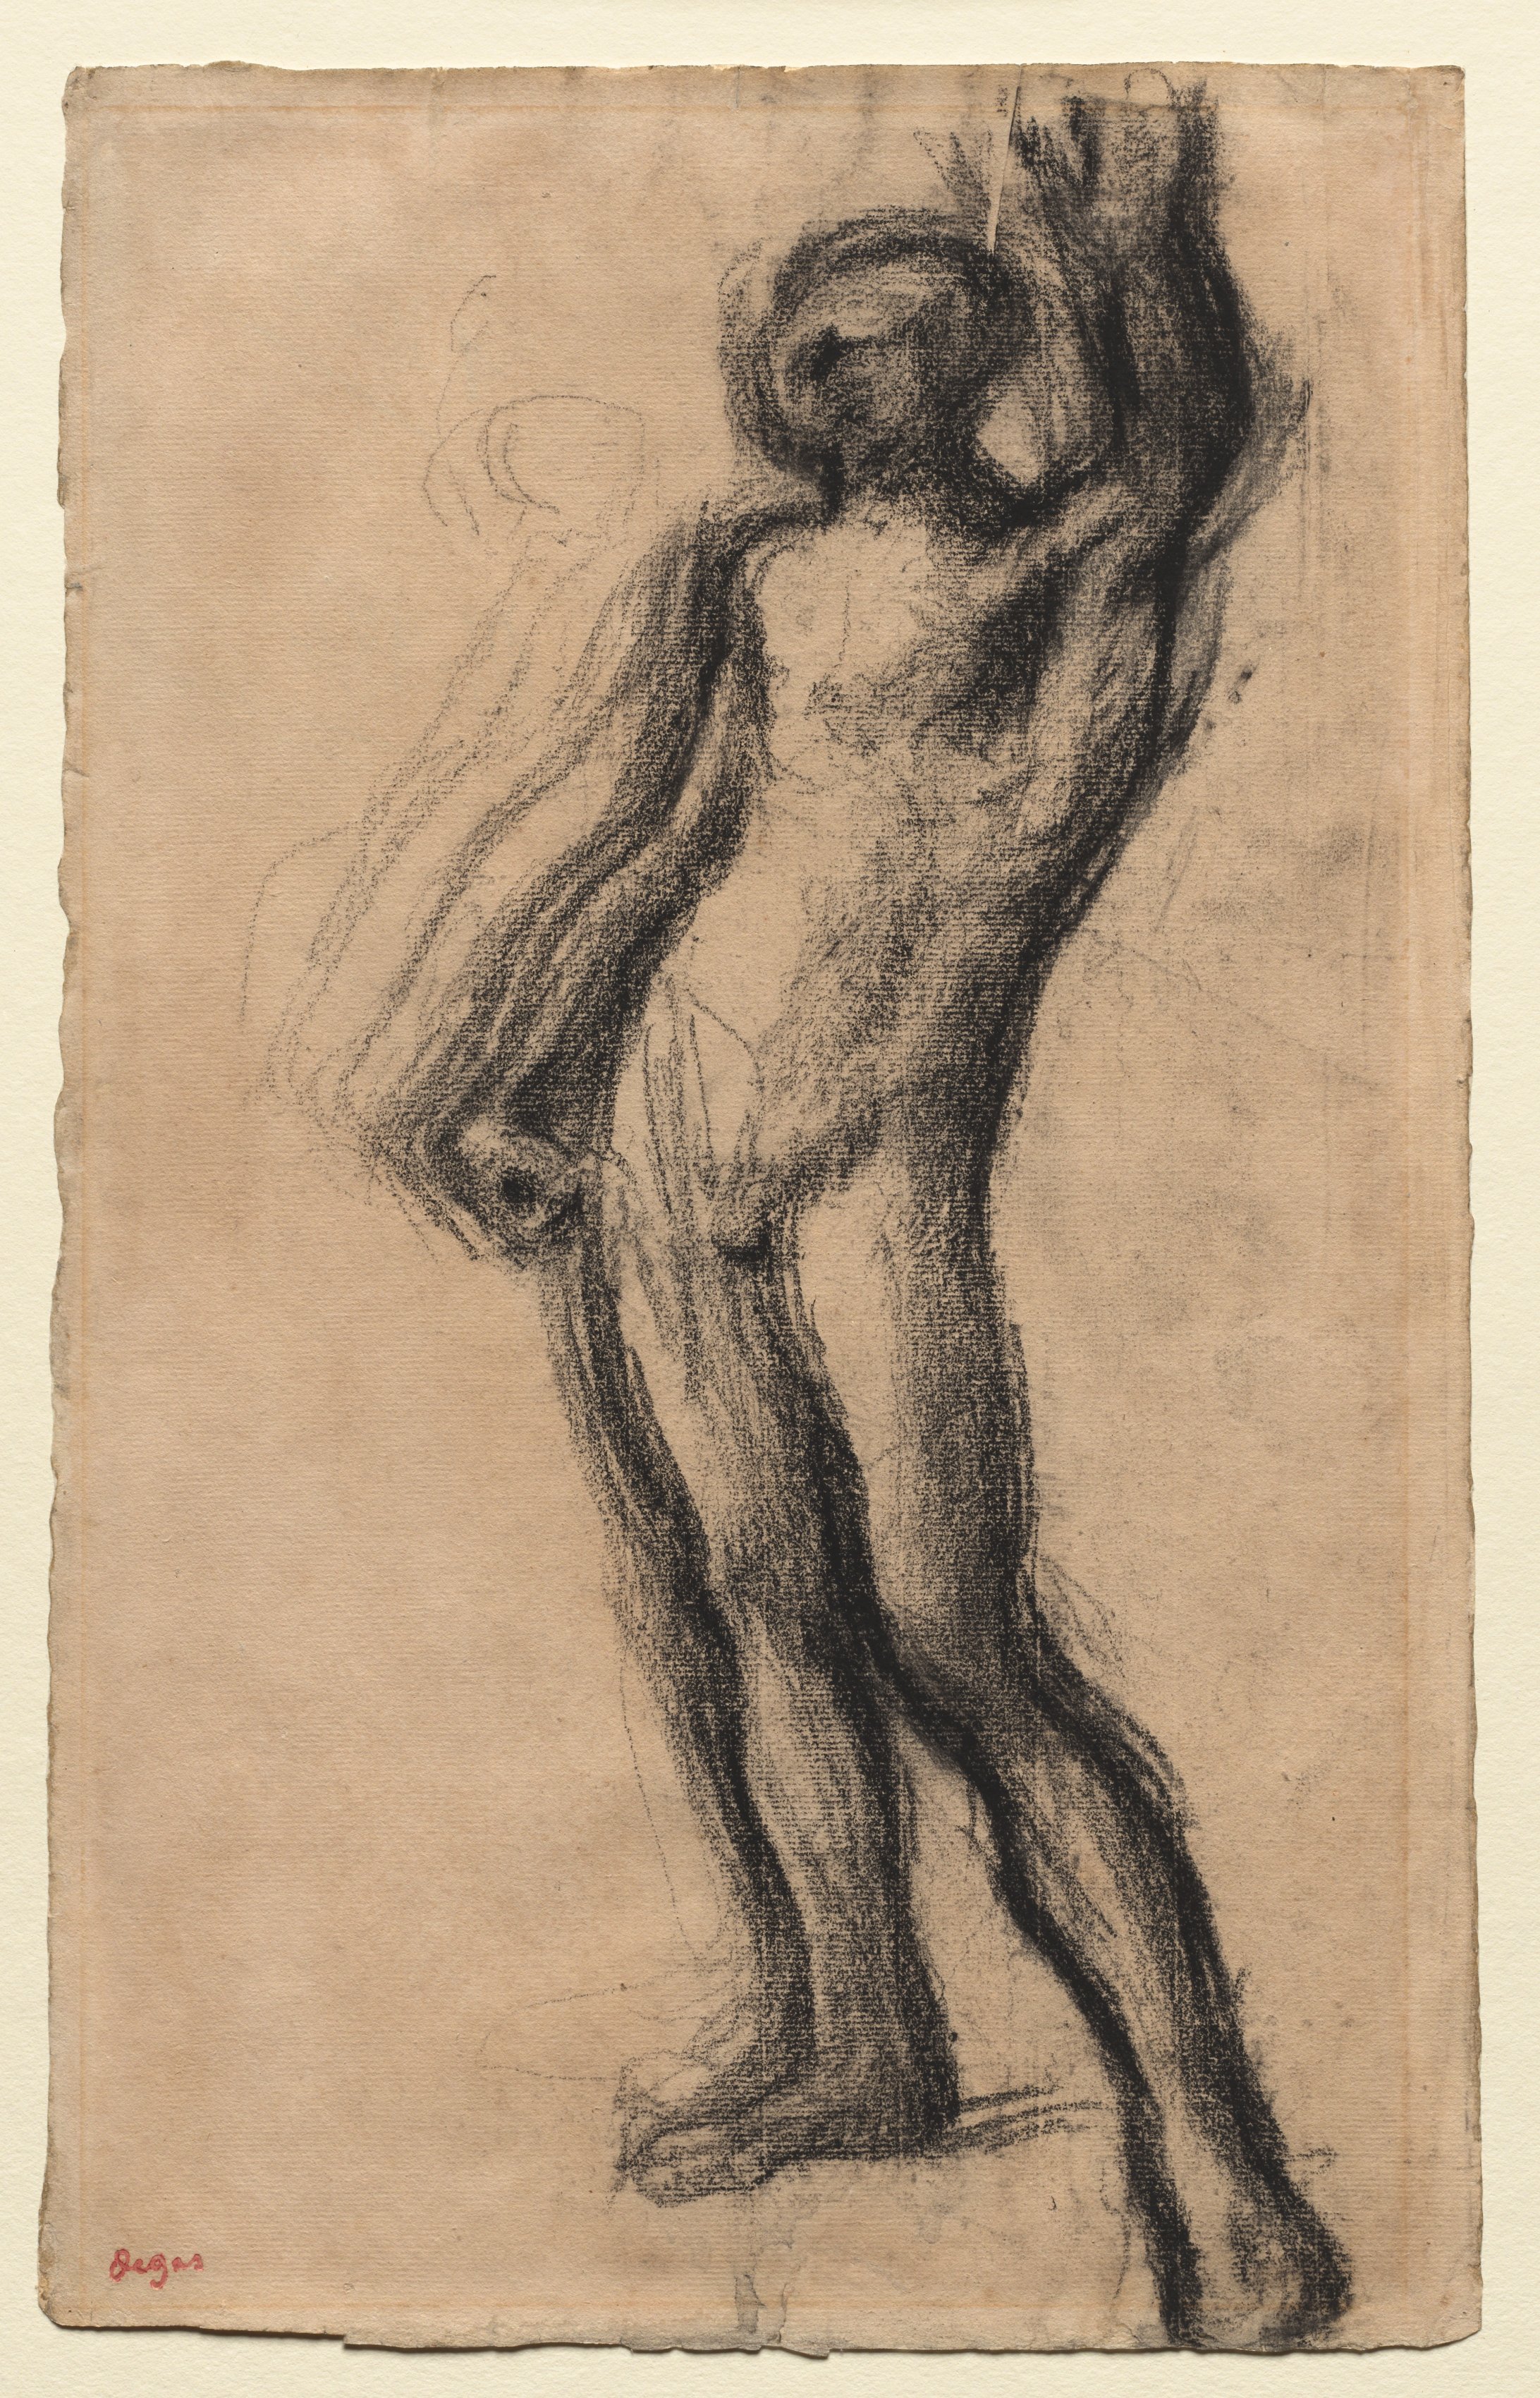 Nude Man Standing, with Left Hand Raised